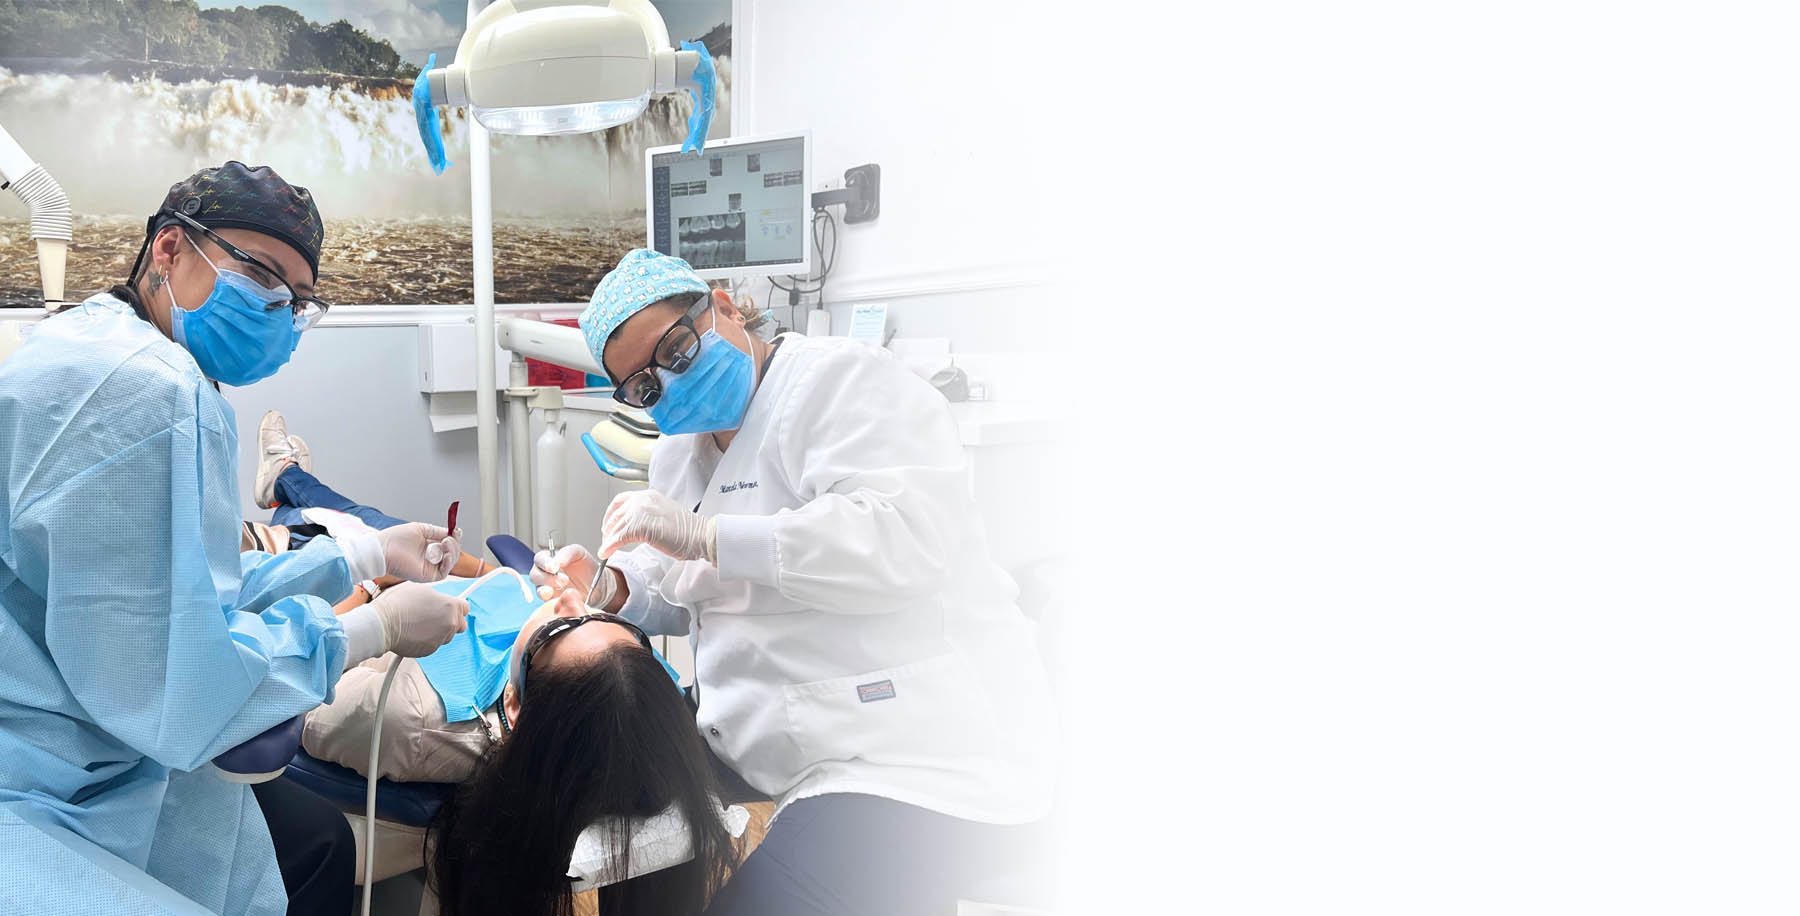 Gentle Dentistry & Personalized Care